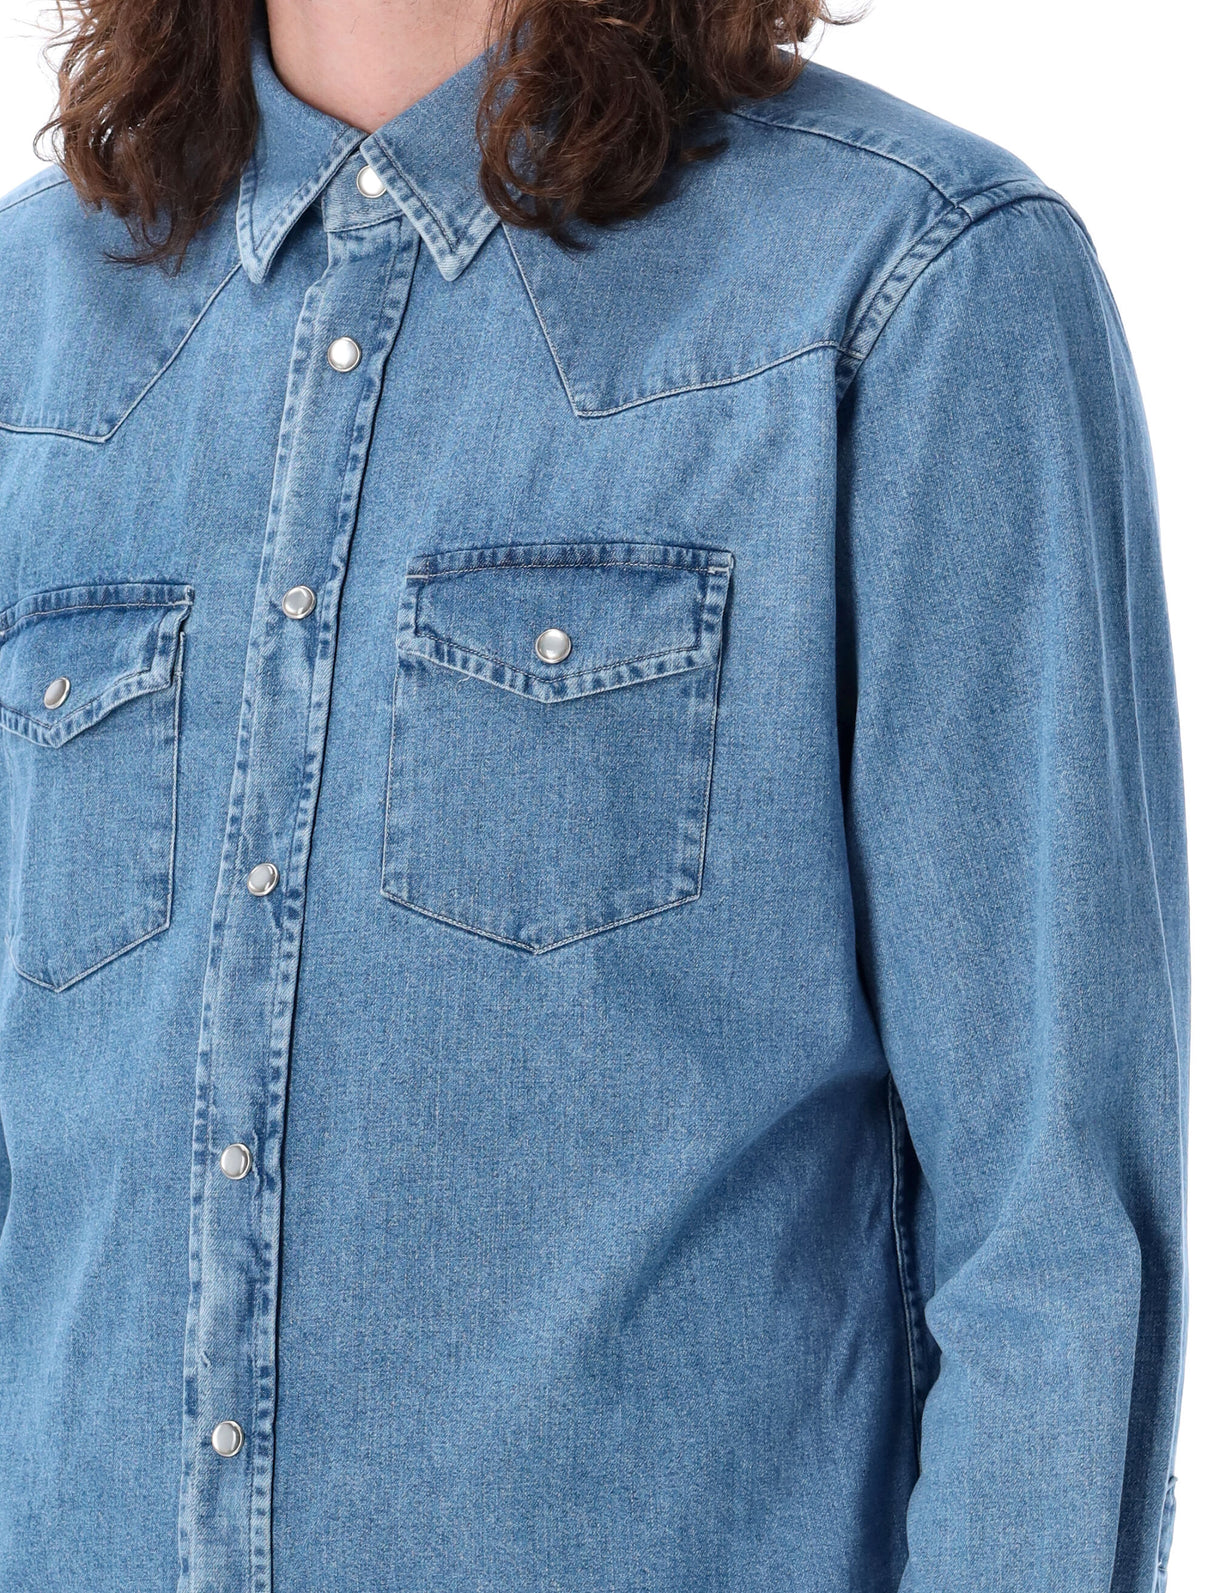 Men's Denim Casual Shirt - Classic Style by TOM FORD